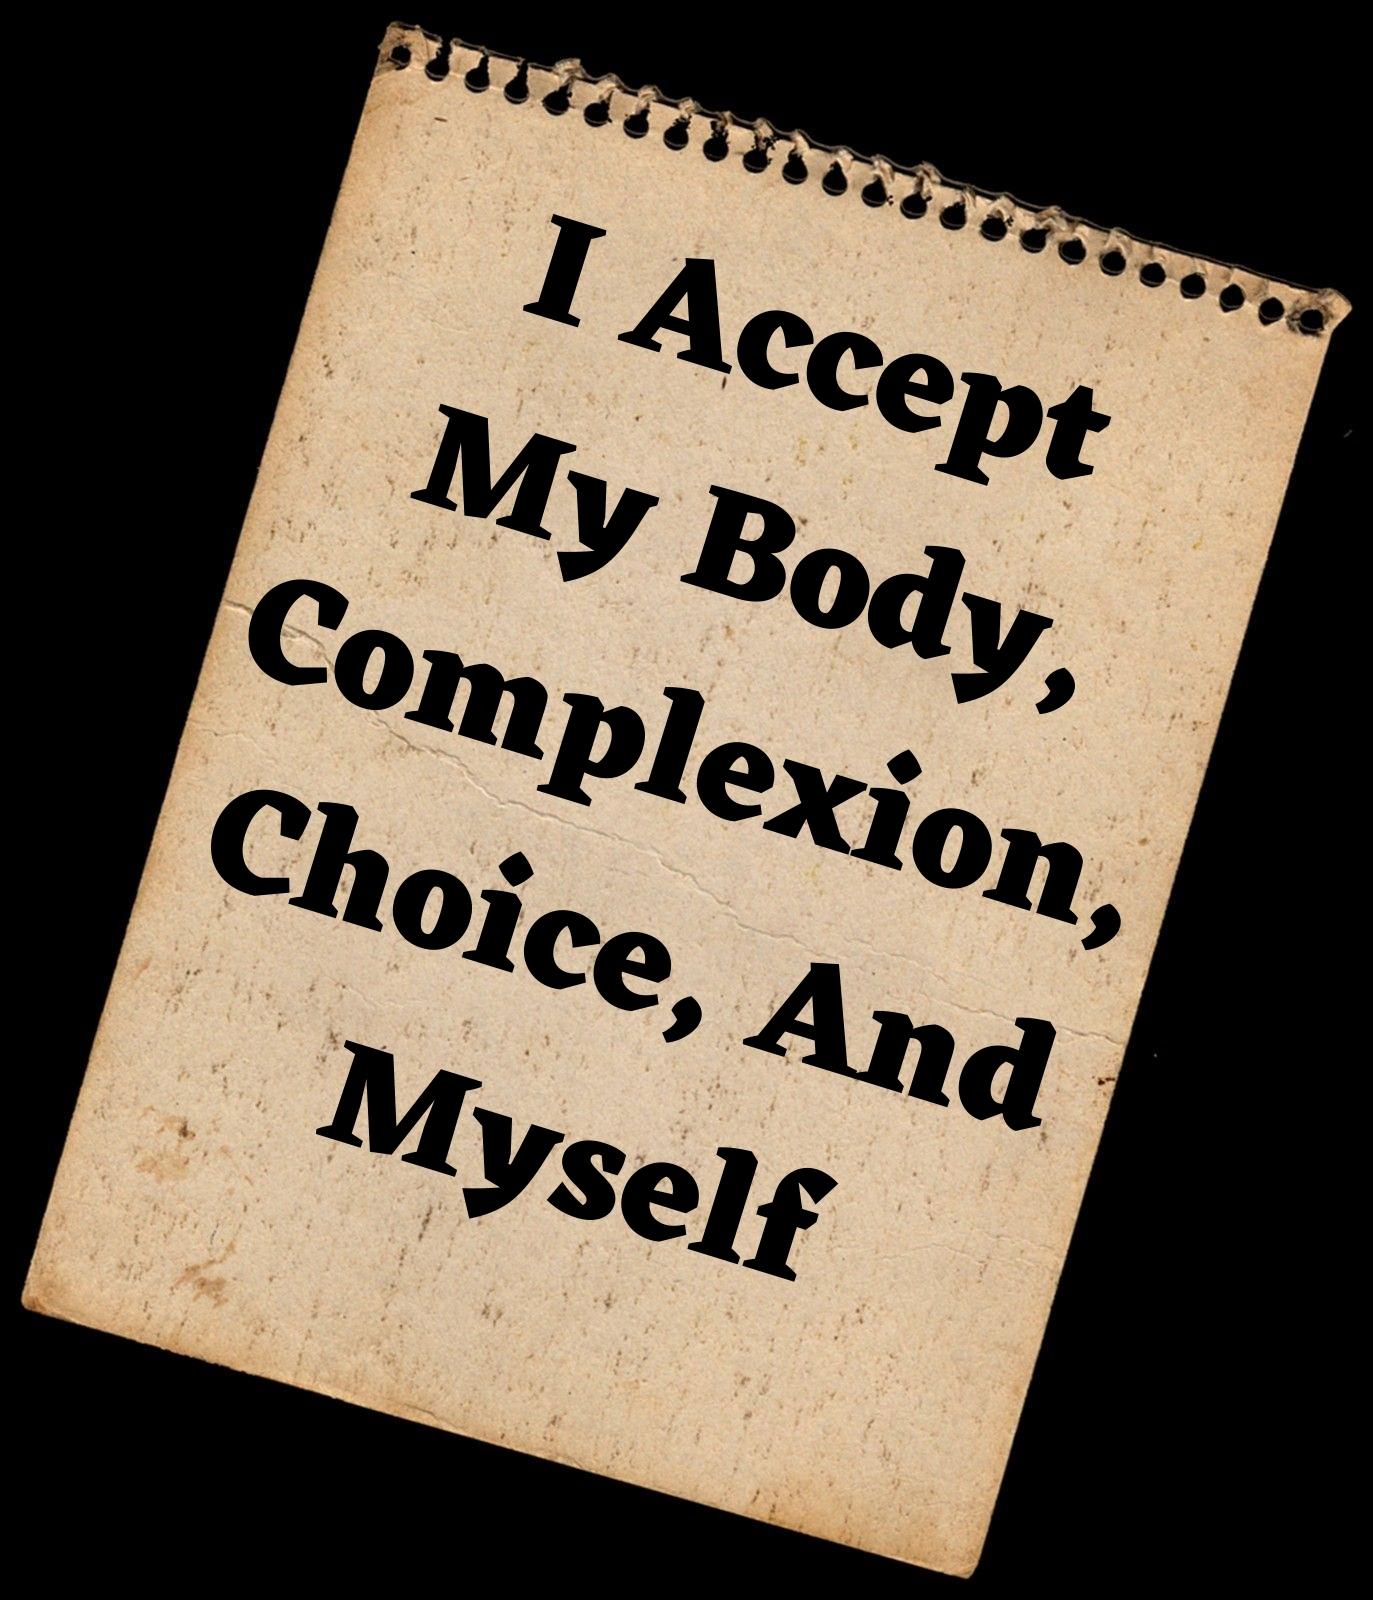 I accept my body, complexion, choice, and myself.